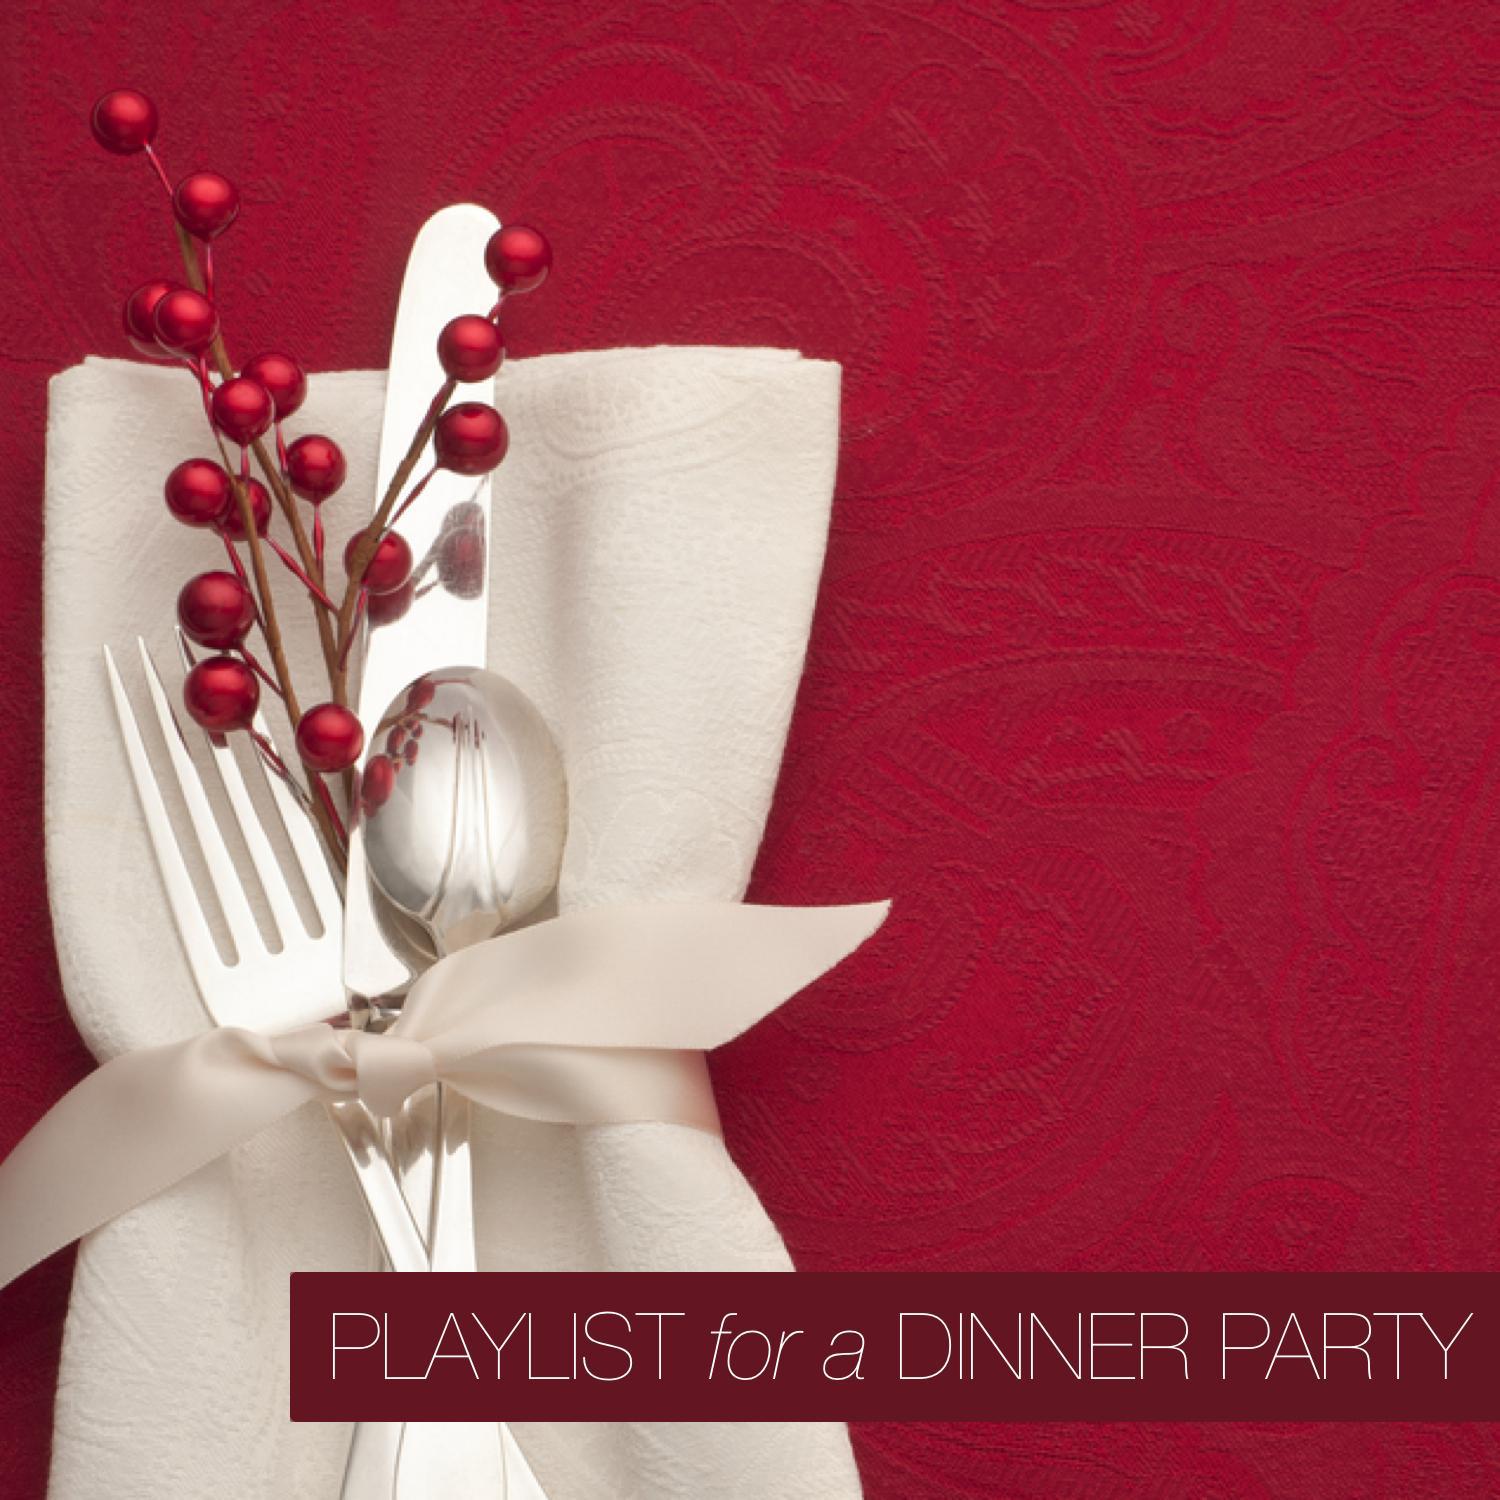 Playlist for a Dinner Party